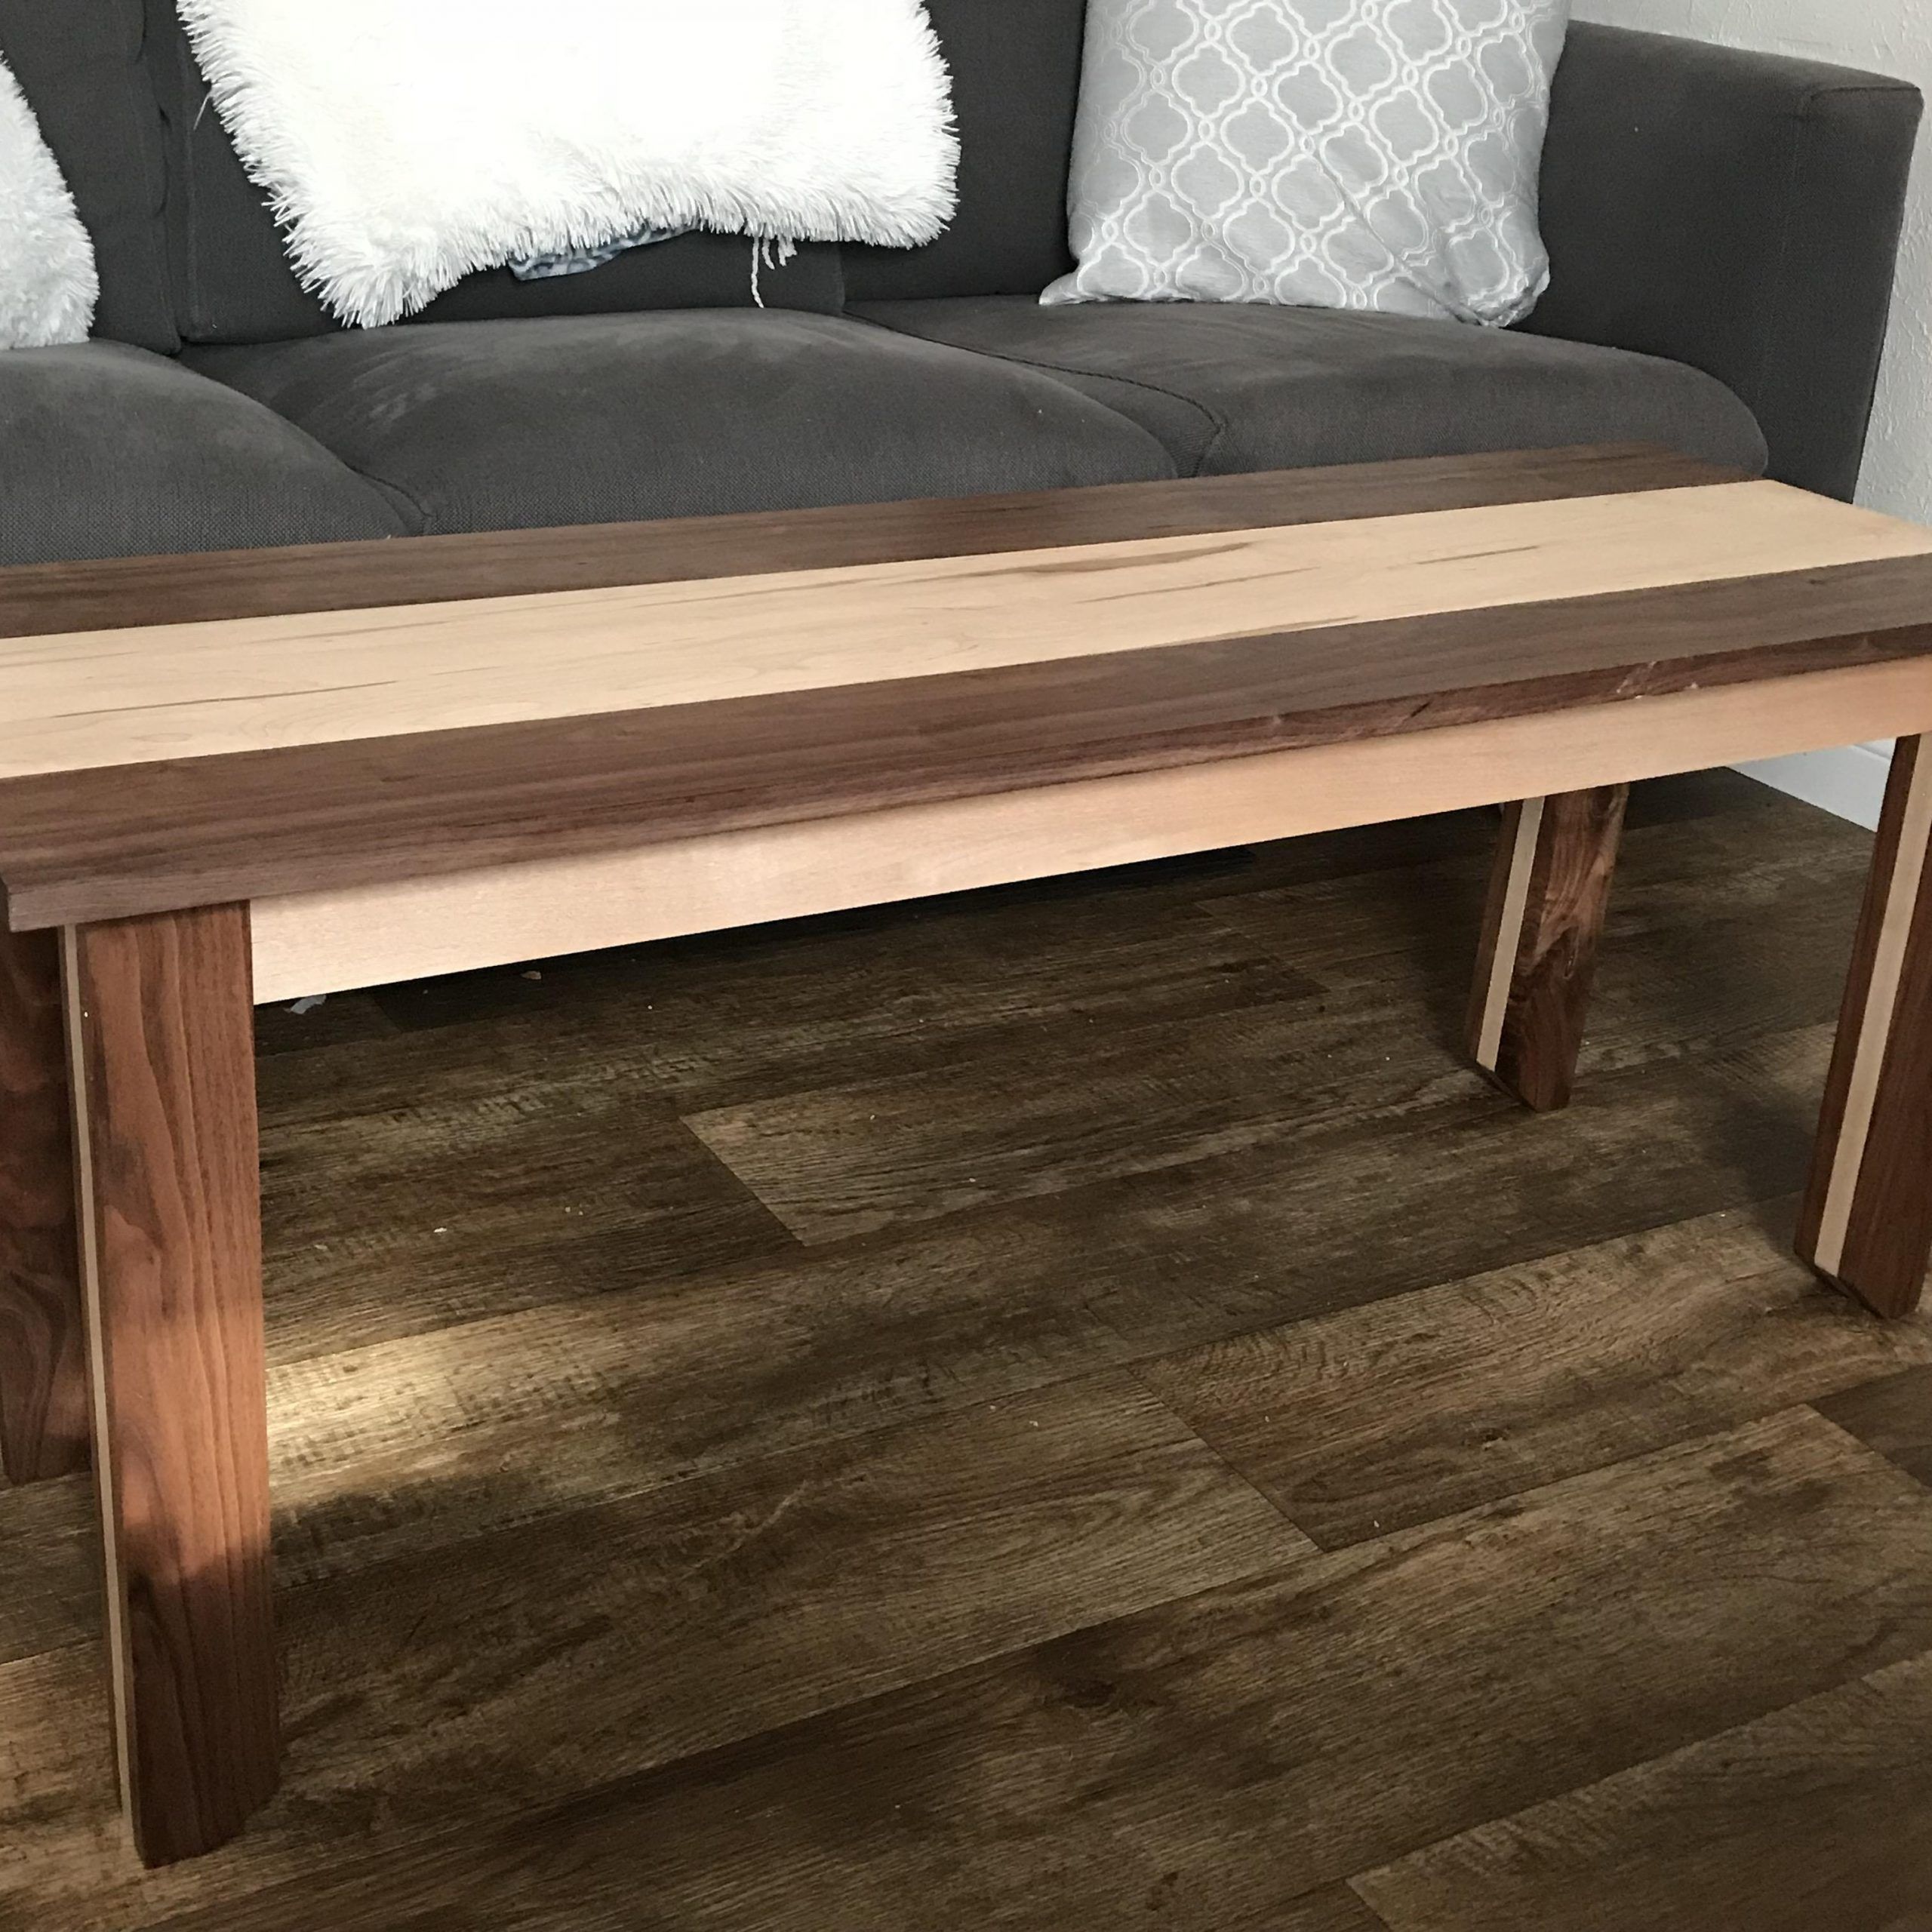 Favorite Hand Finished Walnut Coffee Tables Regarding Walnut And Maple Coffee Table I Just Finished Up : Woodworking (View 16 of 20)